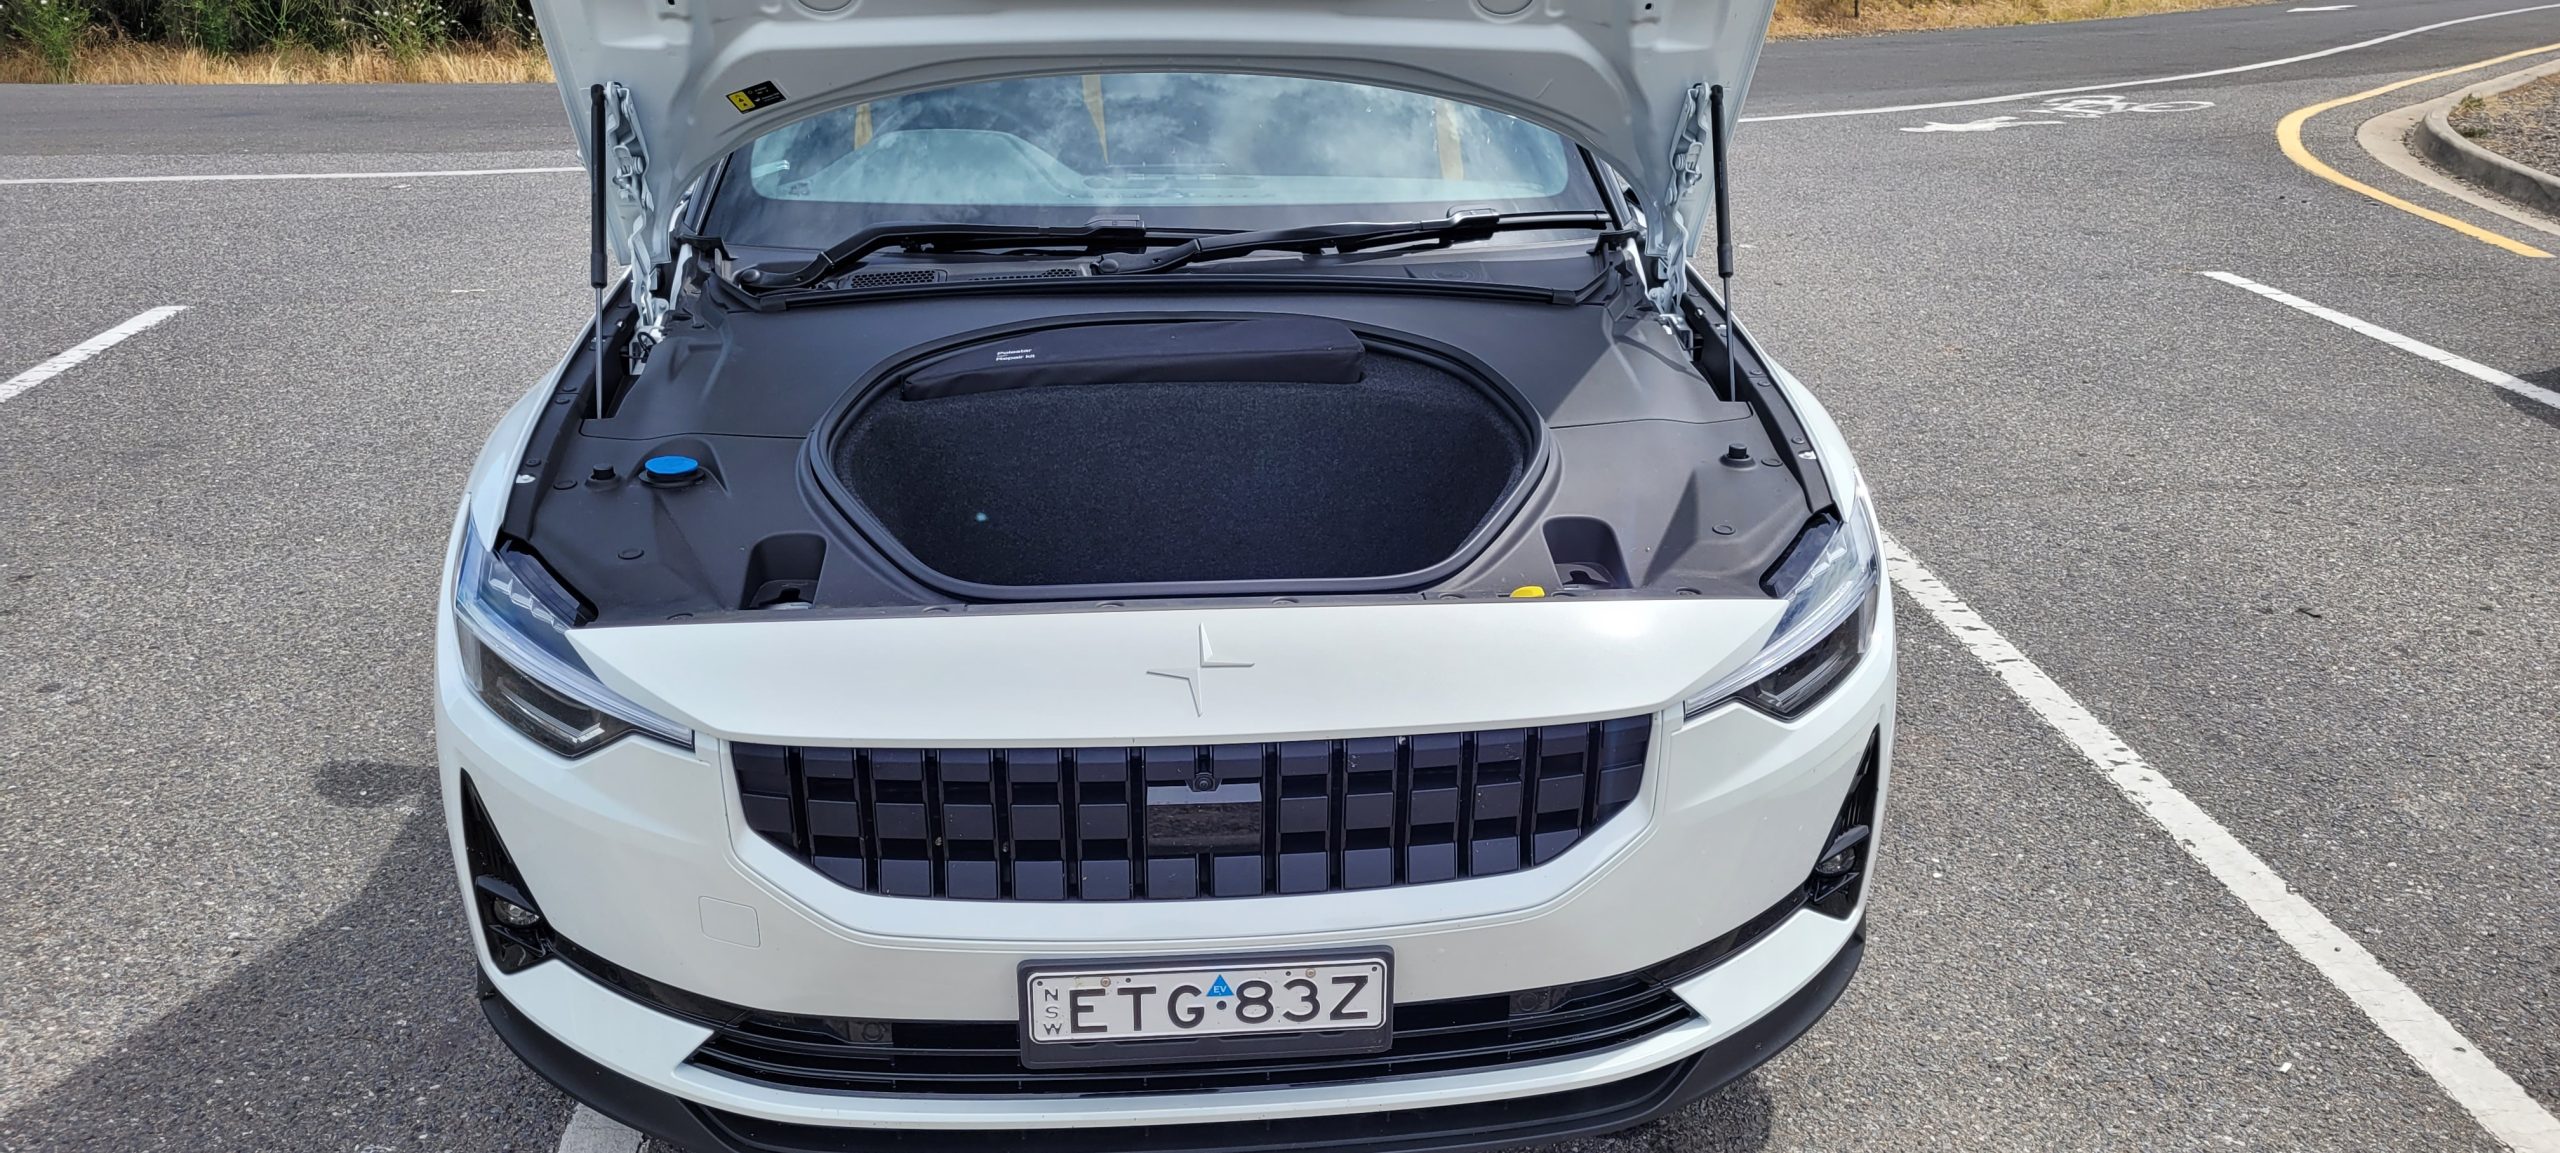 Polestar 2 EV with front hood open showing the frunk